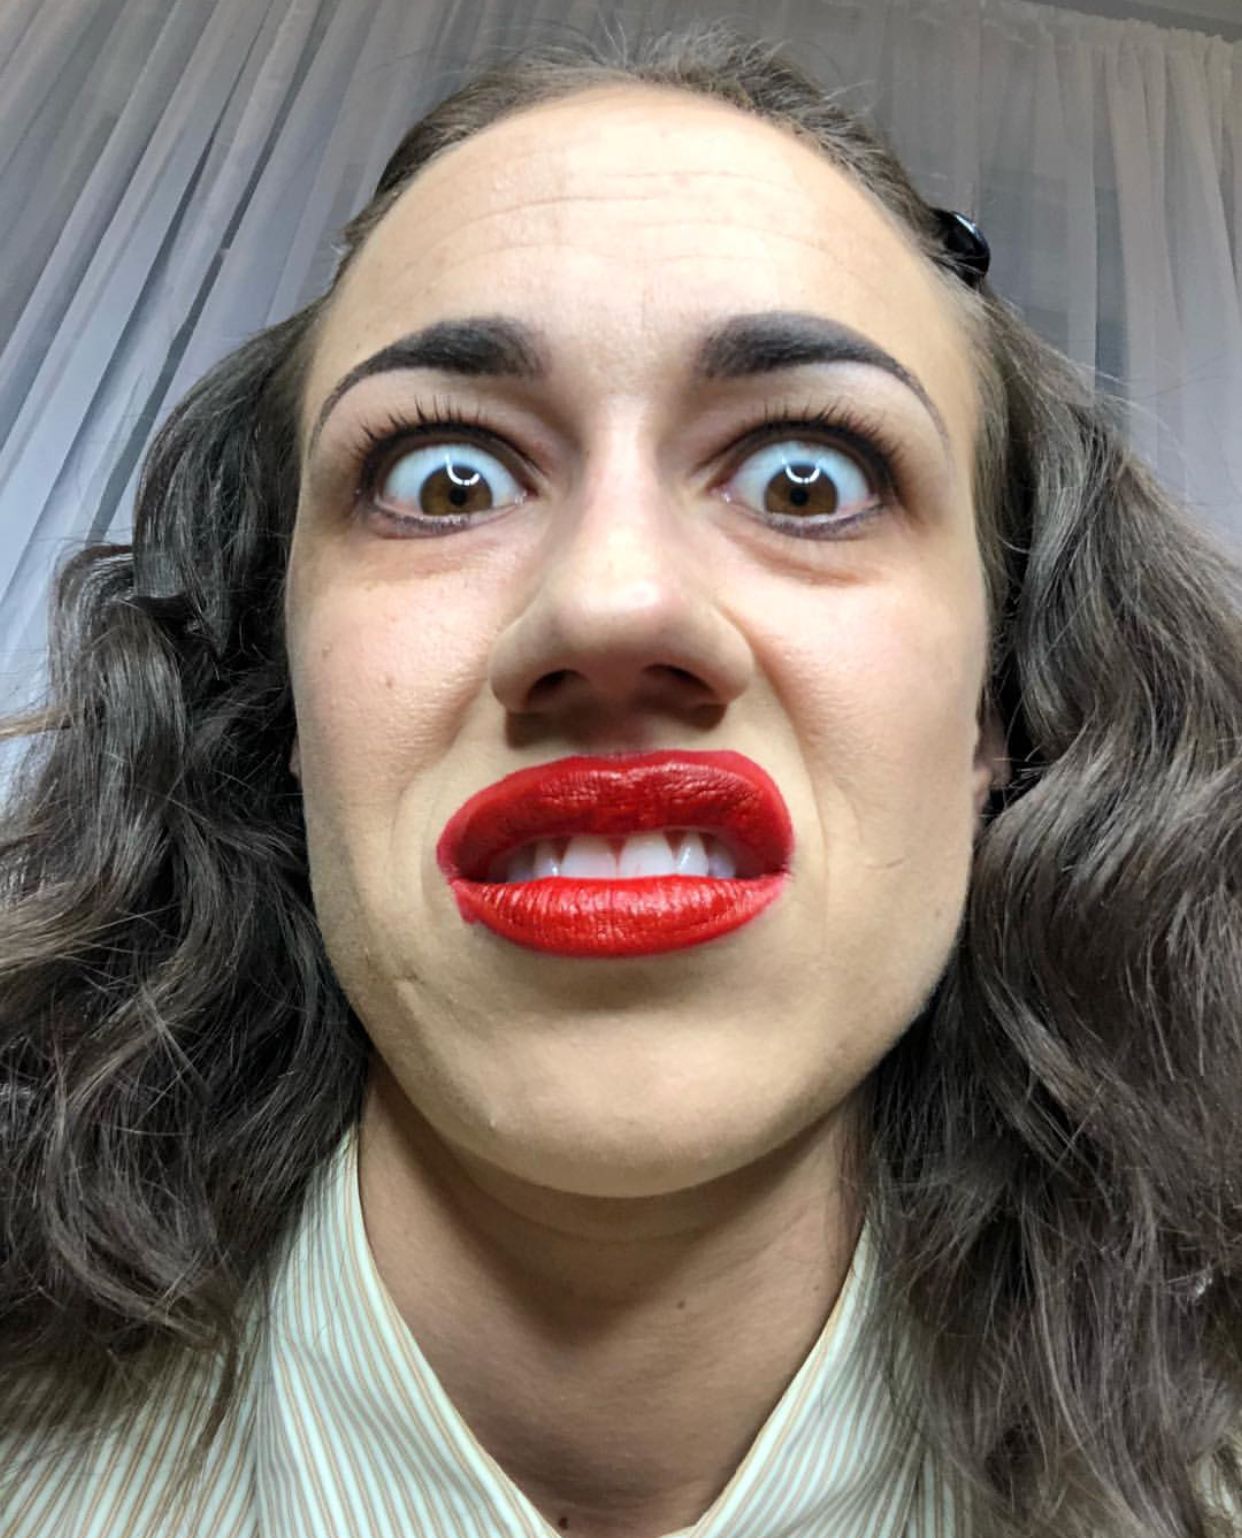 donald kuskie recommends youtuber with big lips pic